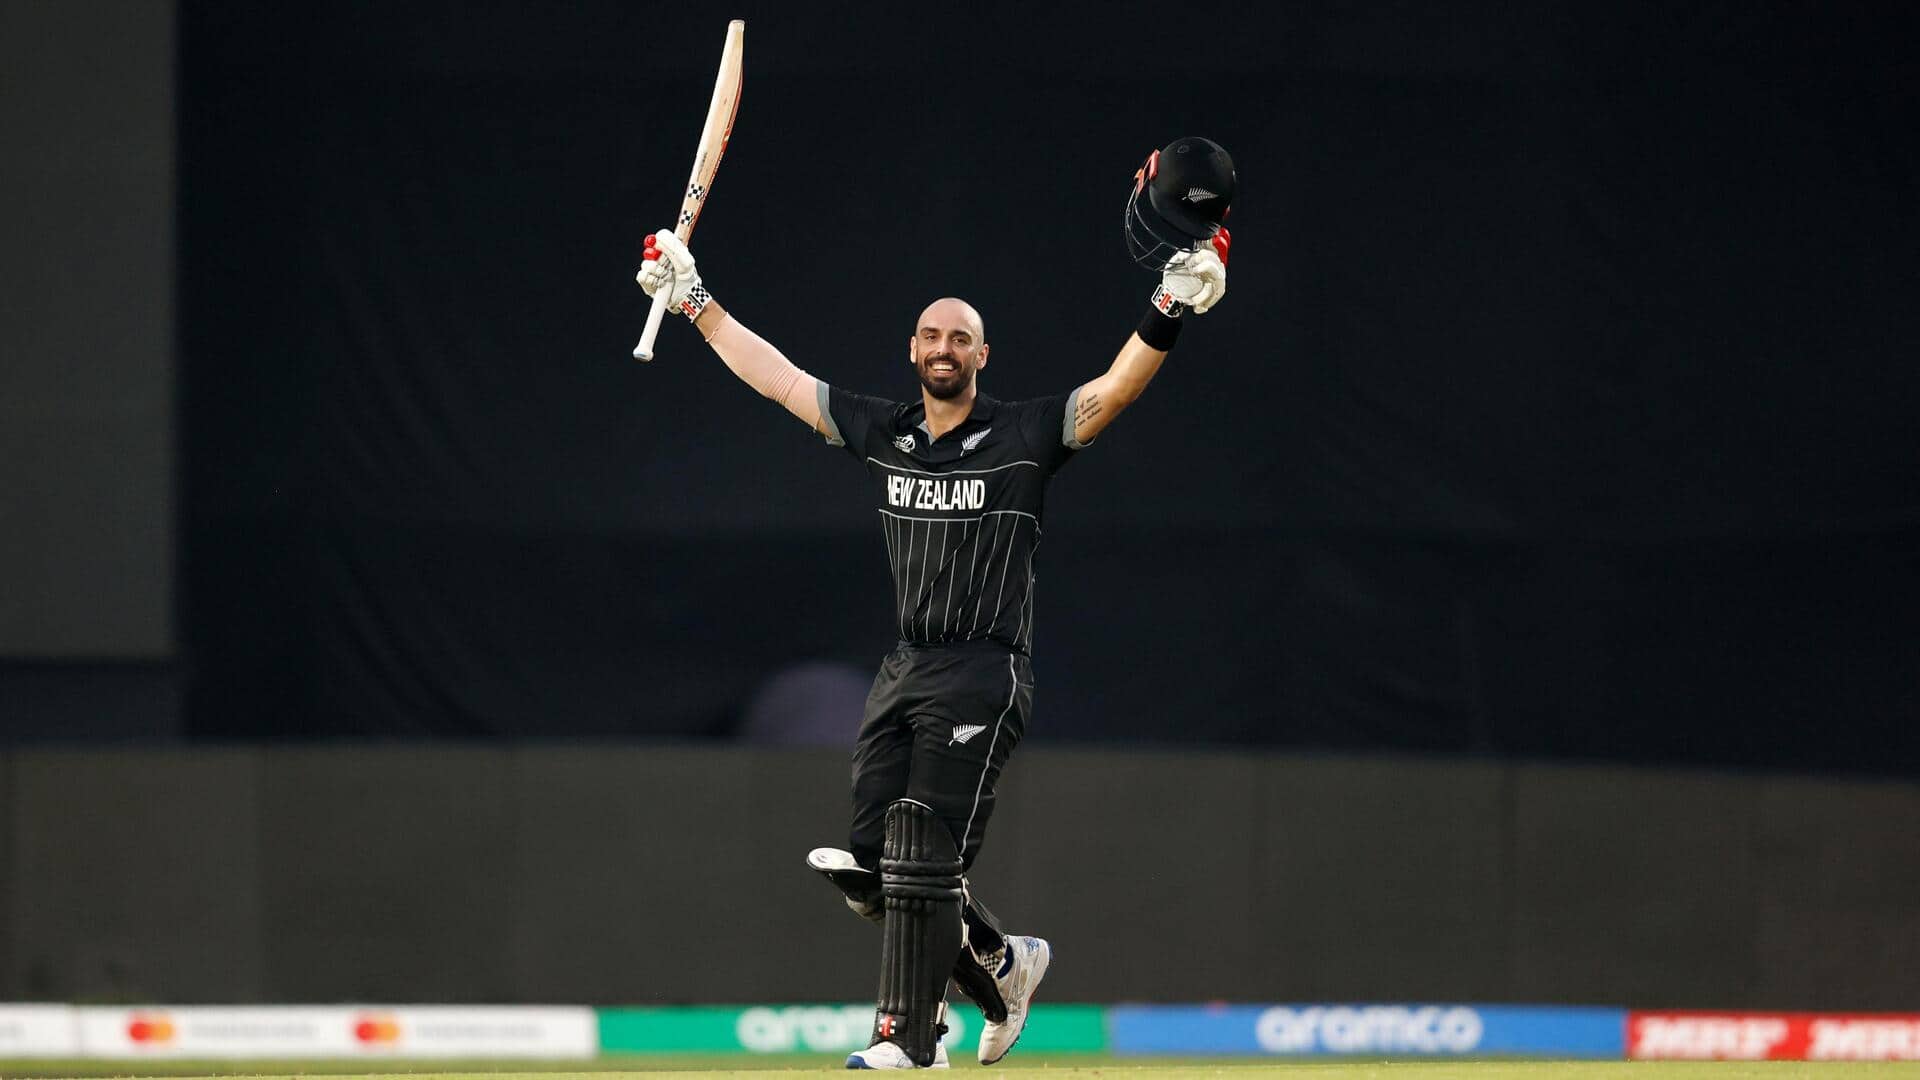 New Zealand's Daryl Mitchell slams his maiden World Cup century